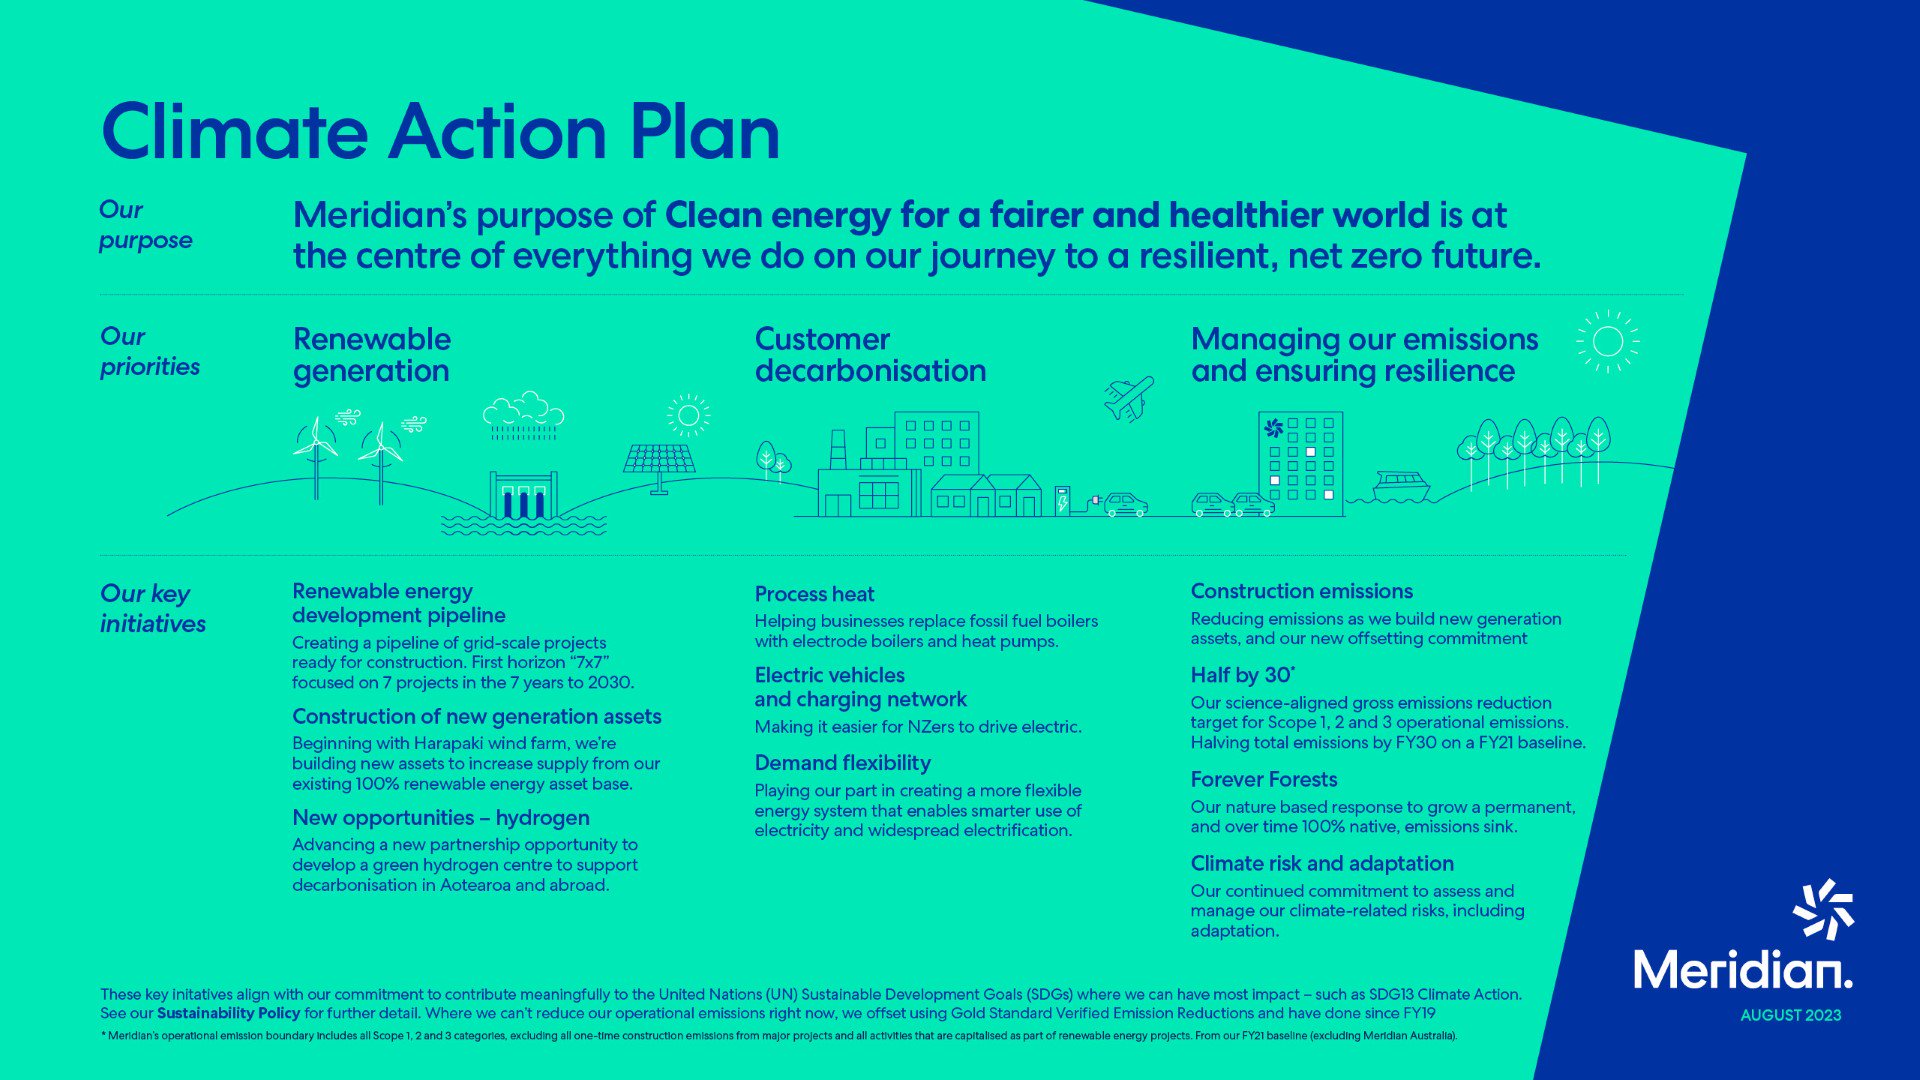 Meridian climate action plan